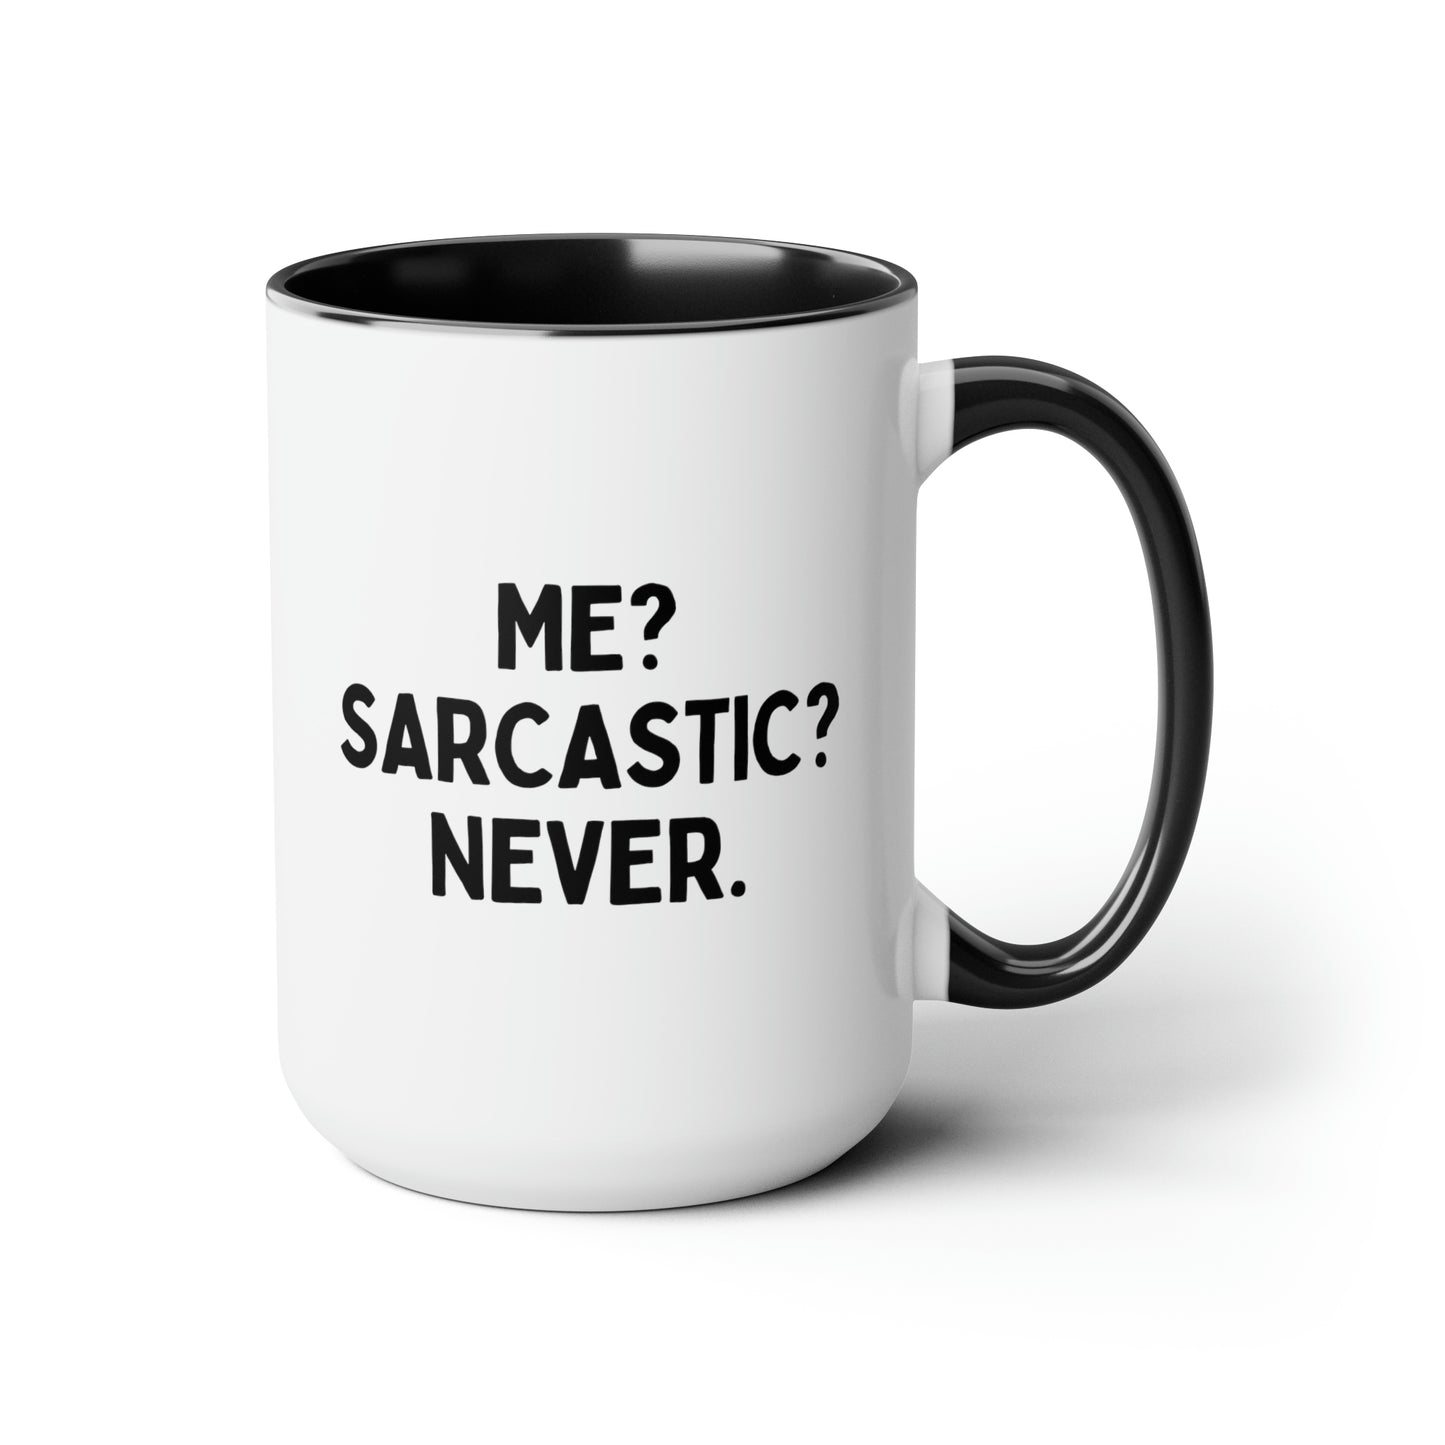 Me? Sarcastic? Never 15oz white with black accent funny large coffee mug gift for boyfriend dad mom best friend sassy adult humor sarcasm waveywares wavey wares wavywares wavy wares